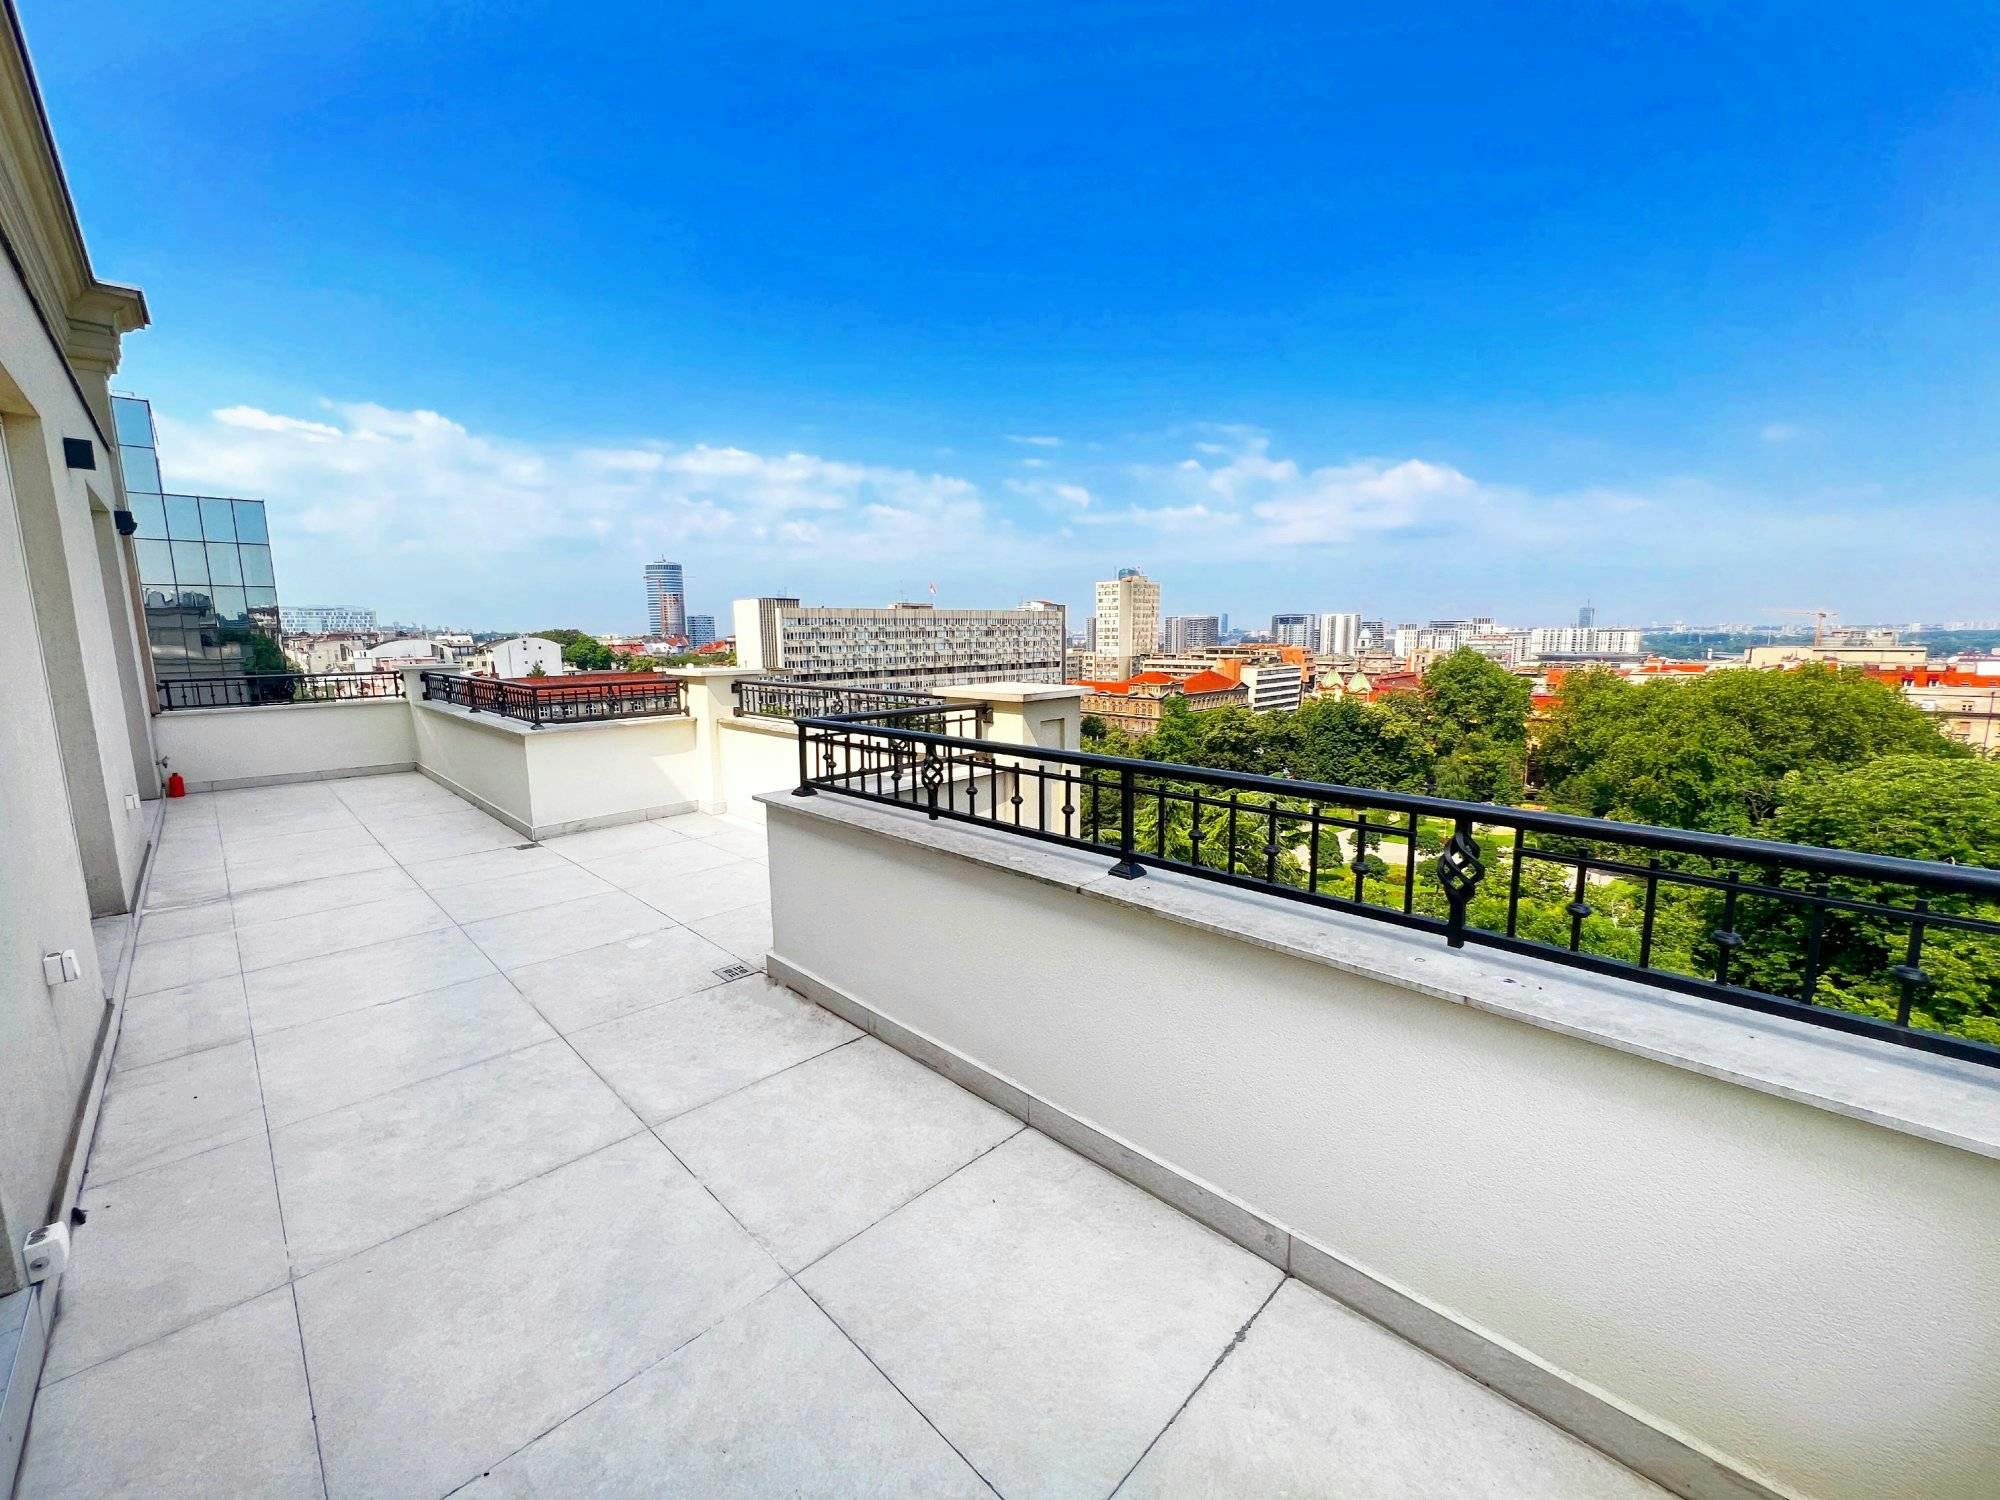 Apartment offering a breathtaking view of Manjež Park